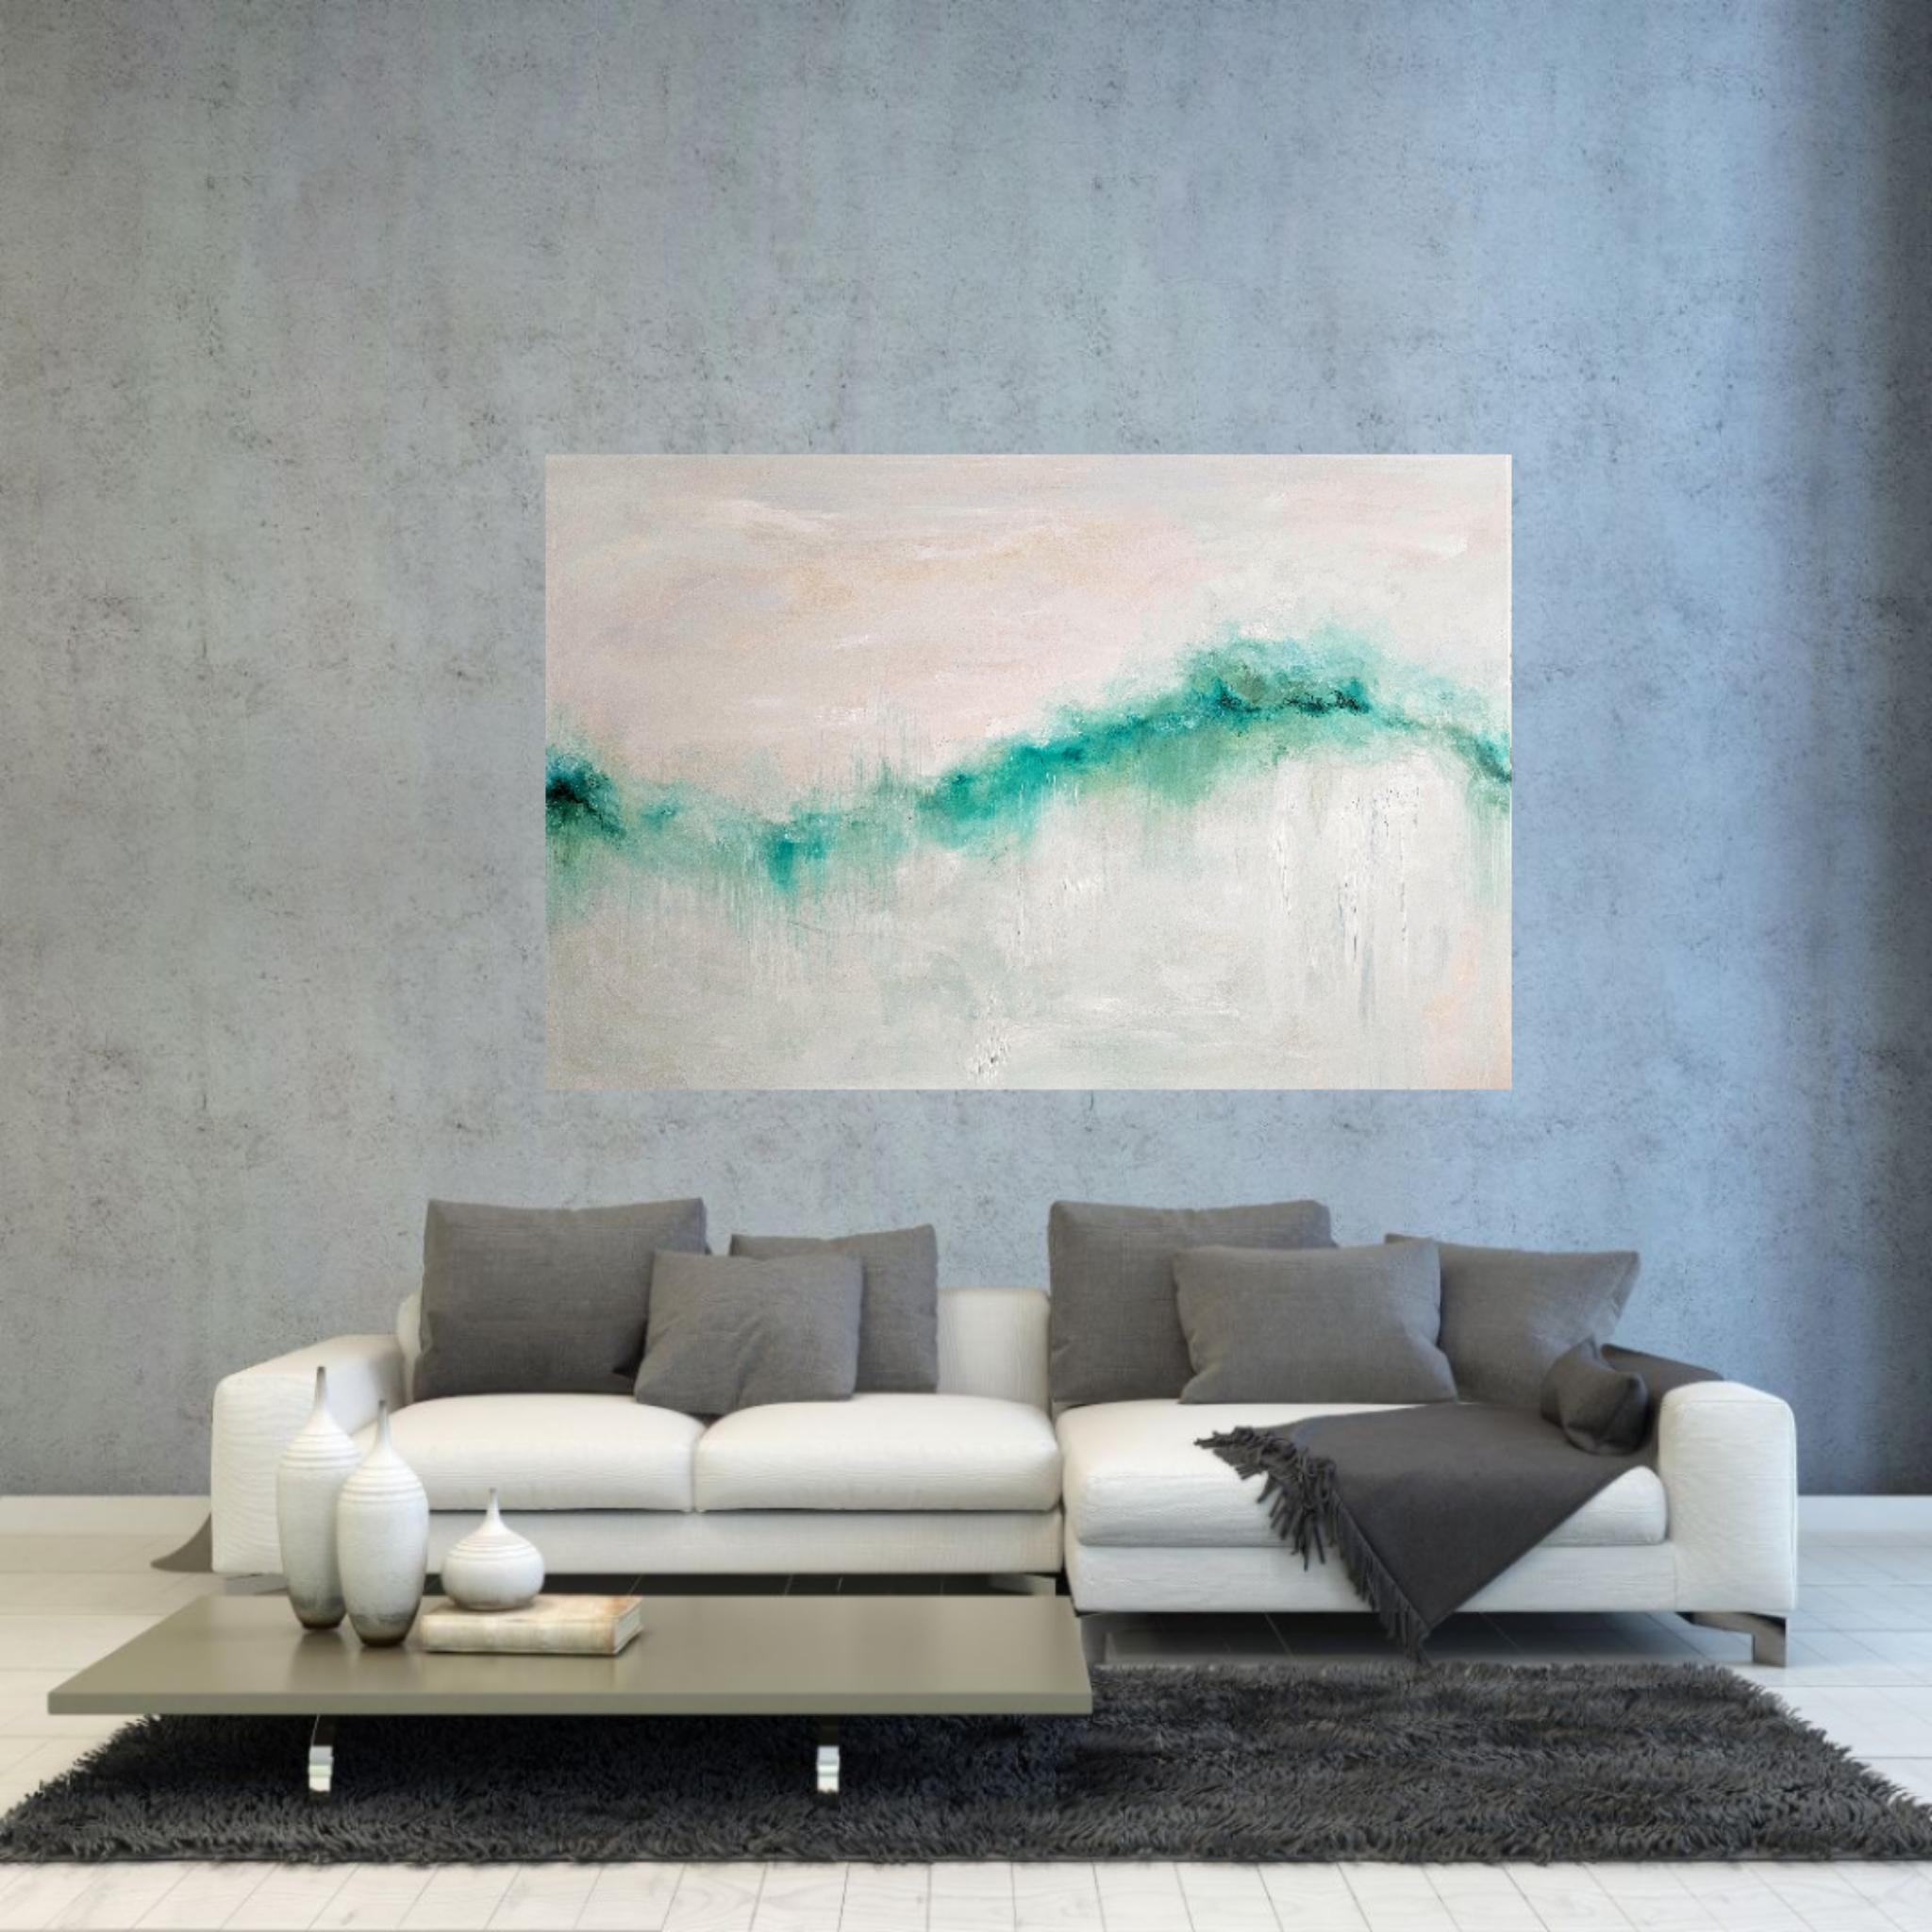 I dreamt of the sea - Large abstract seascape painting - Gray Landscape Painting by Jennifer L. Baker